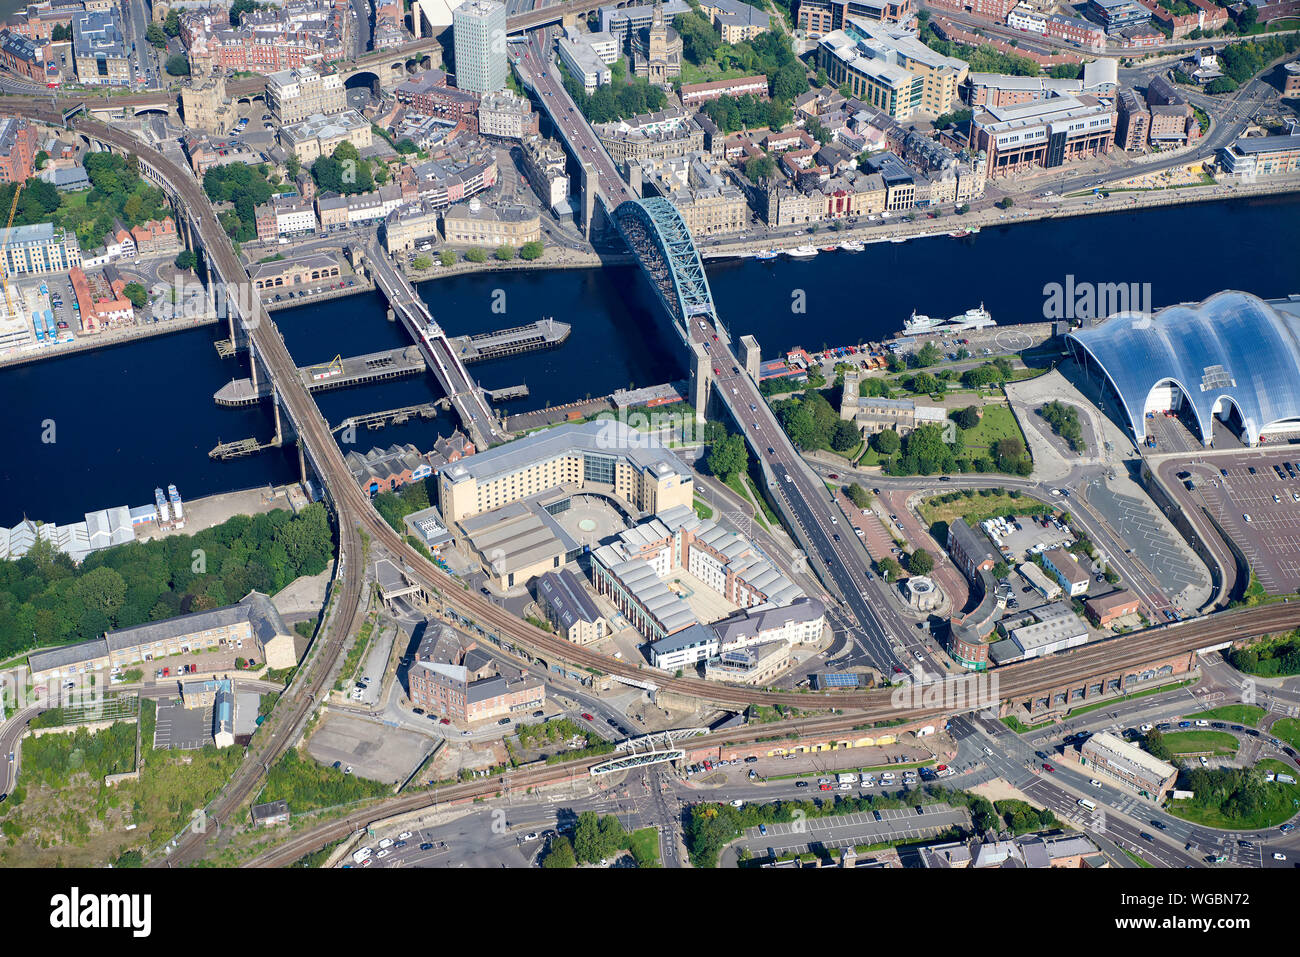 An aerial view of Newcastle upon Tyne, city centre, North East  England, UK showing the Sage at Gateshead Stock Photo